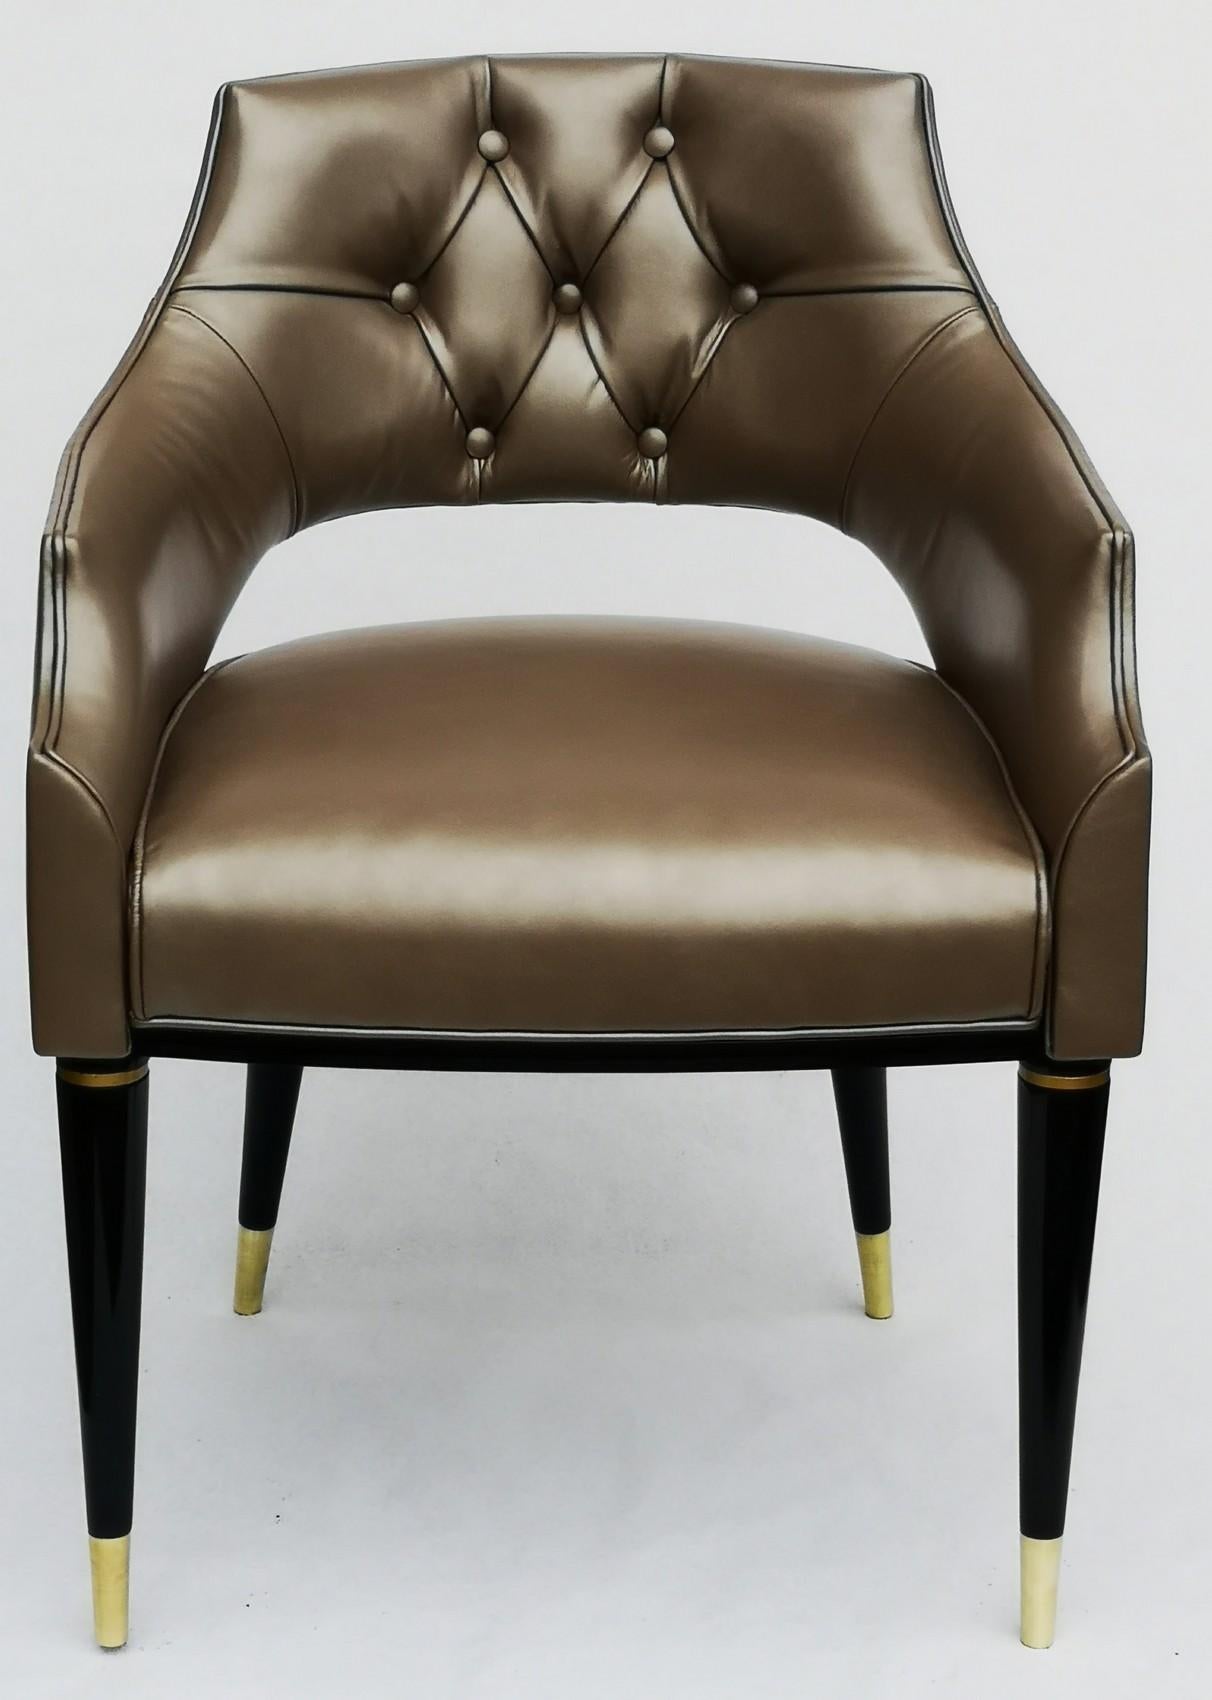 Dining Armchair, Tufted Fiore Italian Leather, Midcentury Style, Luxury Details 4